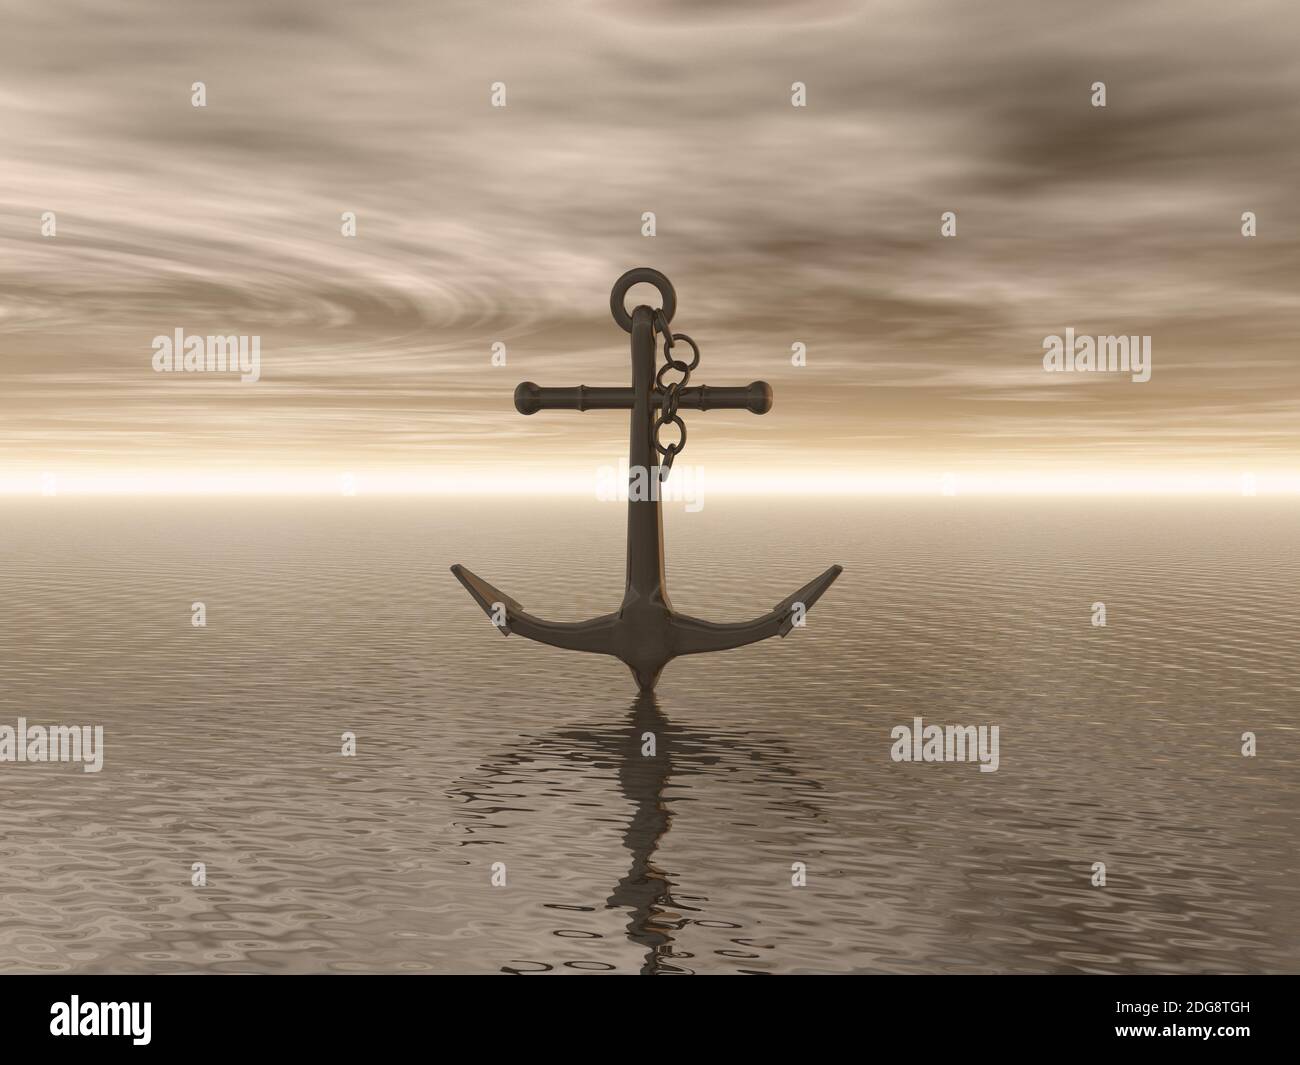 Anchor and landscape 3D illustration rendering Stock Photo